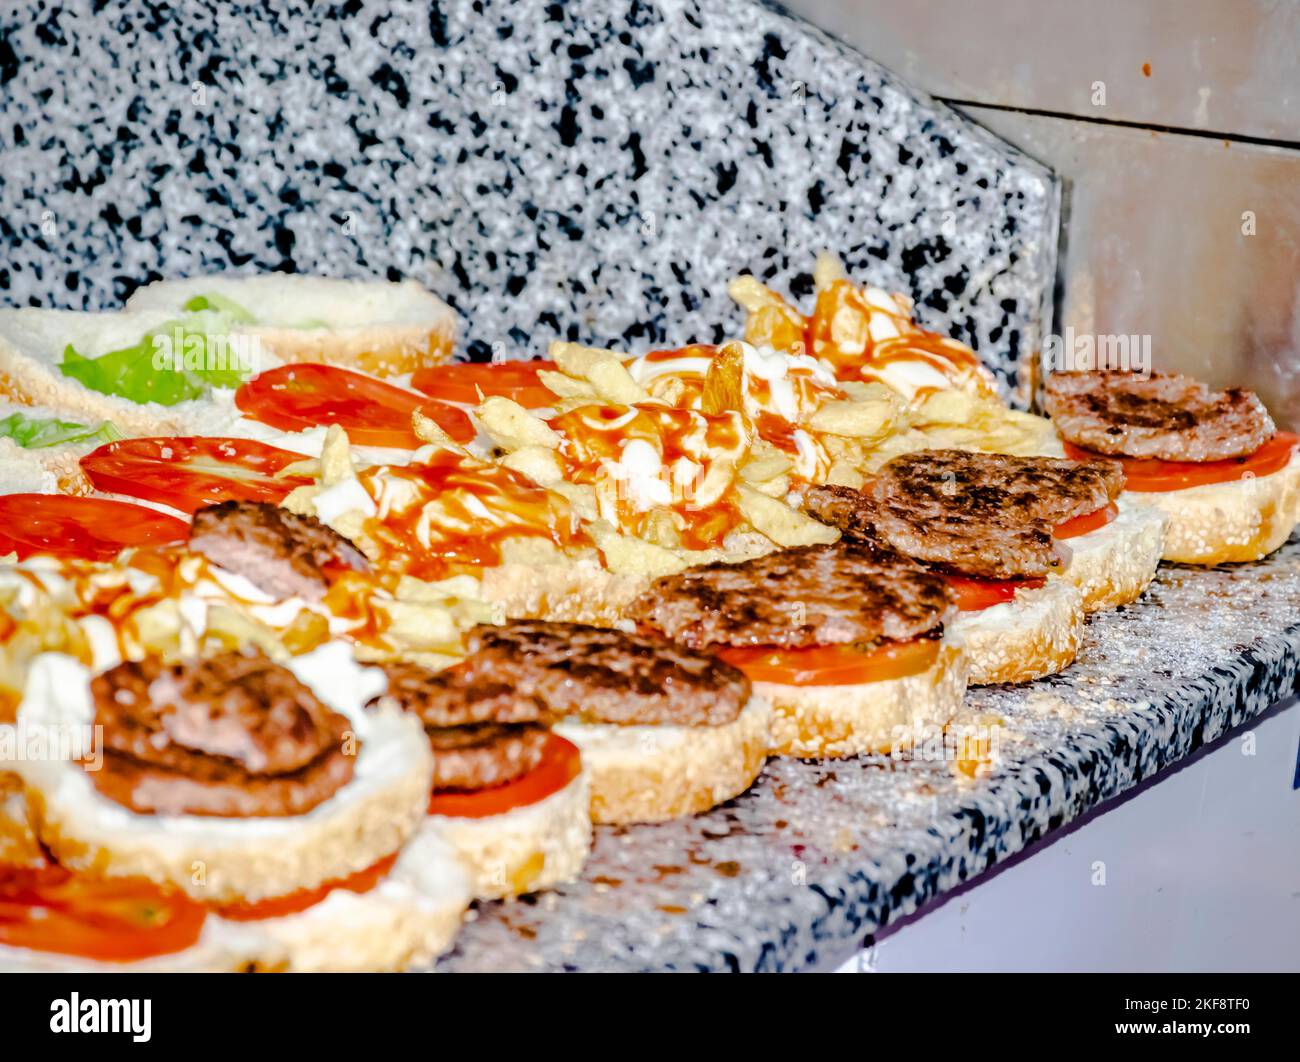 Burgers in a row on worktop, focus on opened hamburgers filled with french fries, lettuce and tomato, grilled chopped steaks, mayonnaise and ketchup. Stock Photo